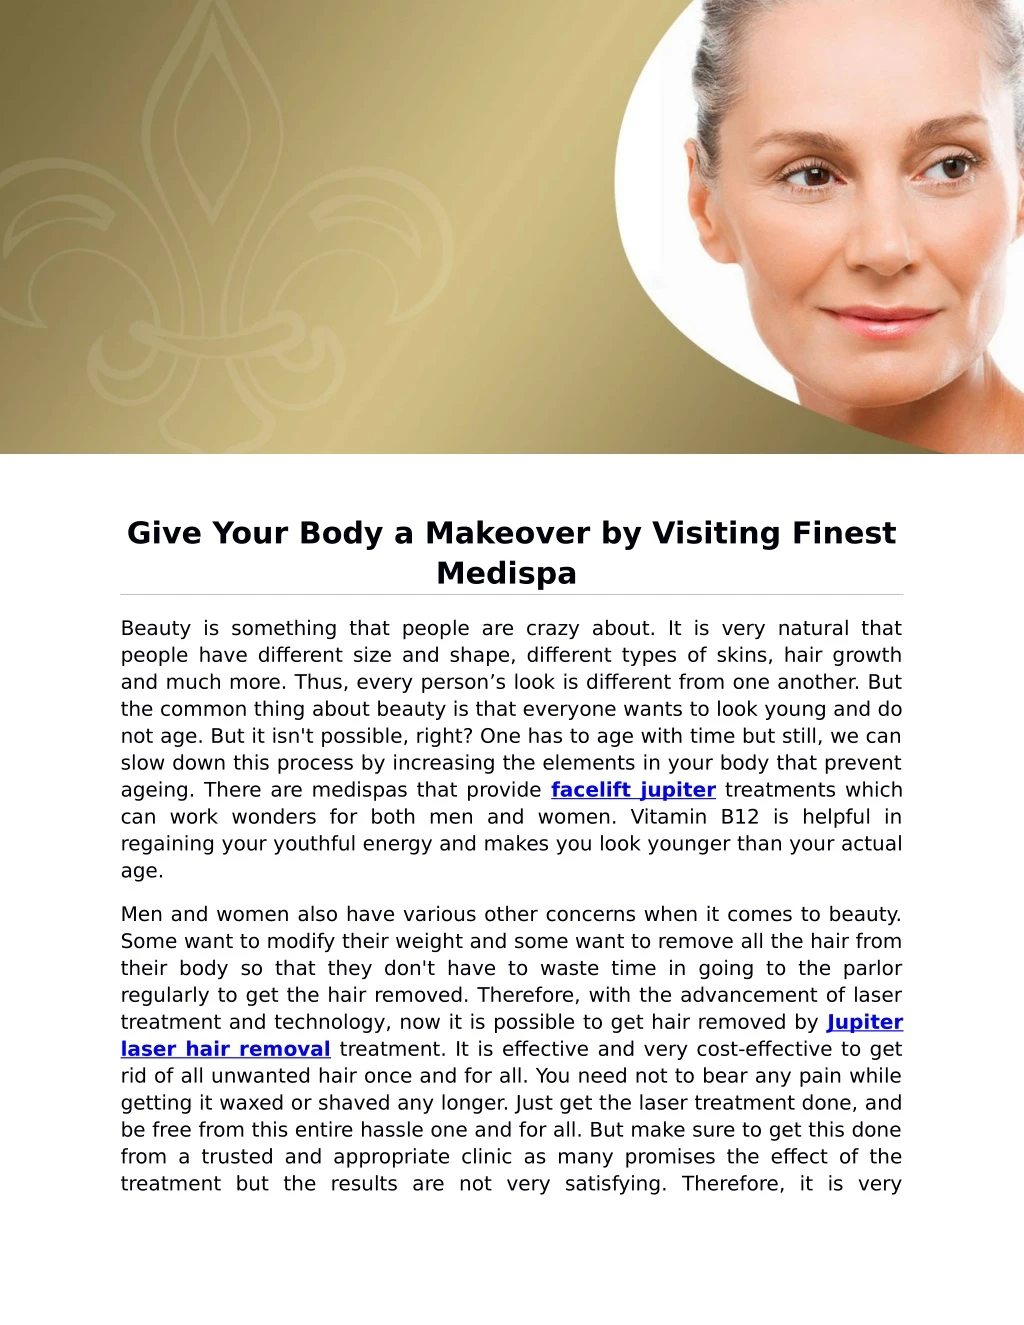 give your body a makeover by visiting finest